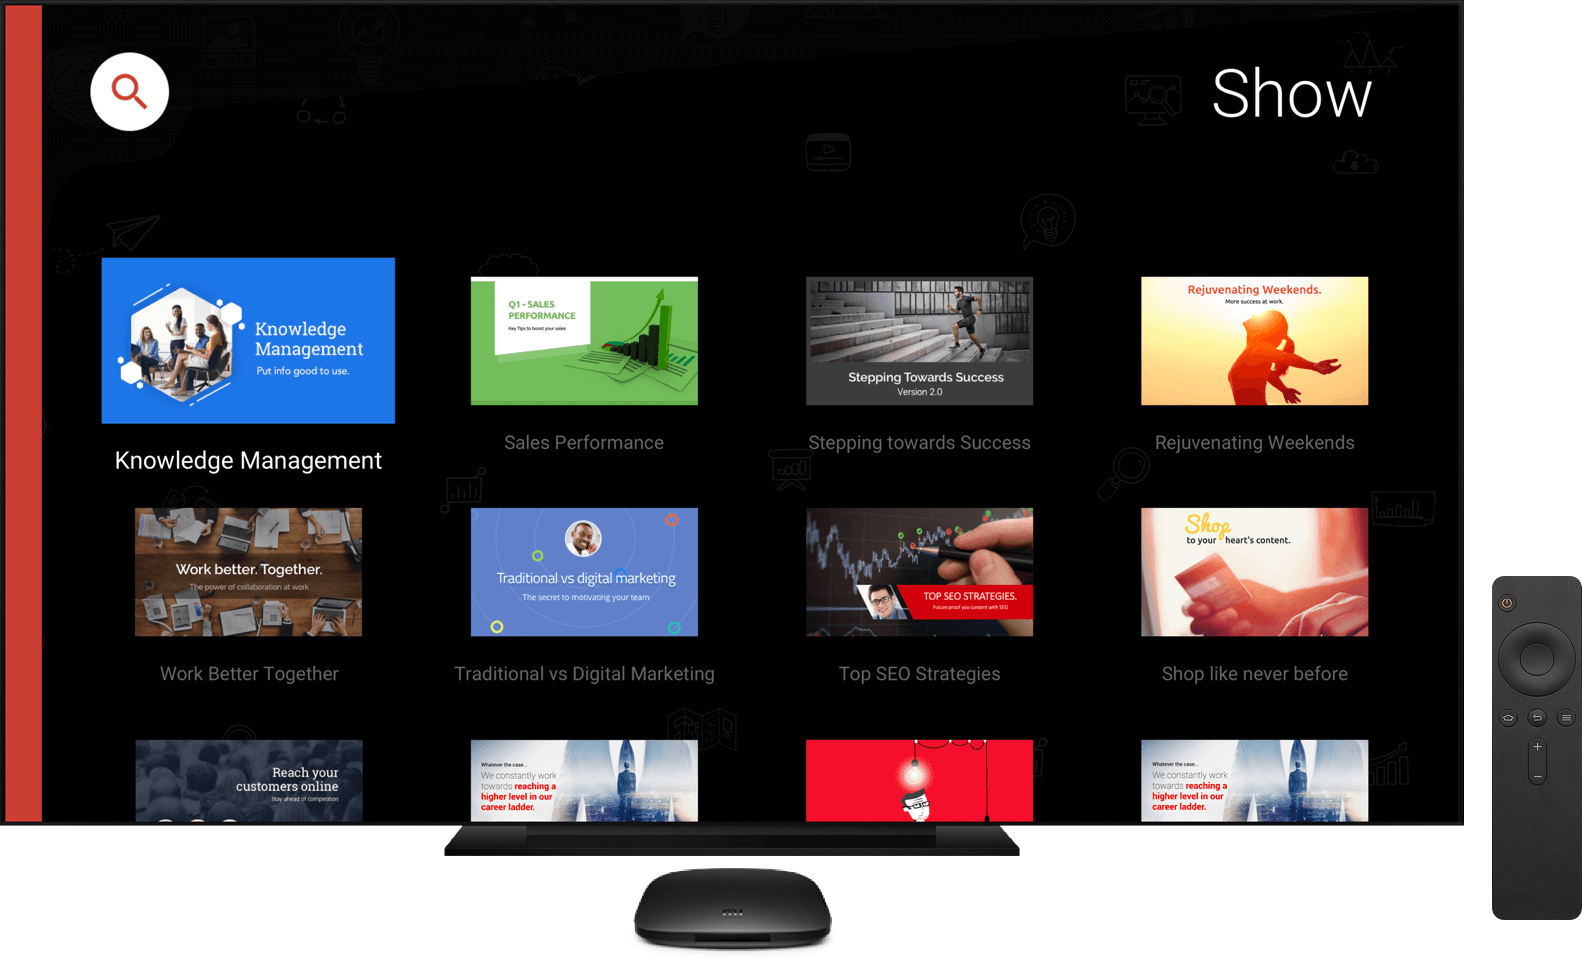 Show for Android TV